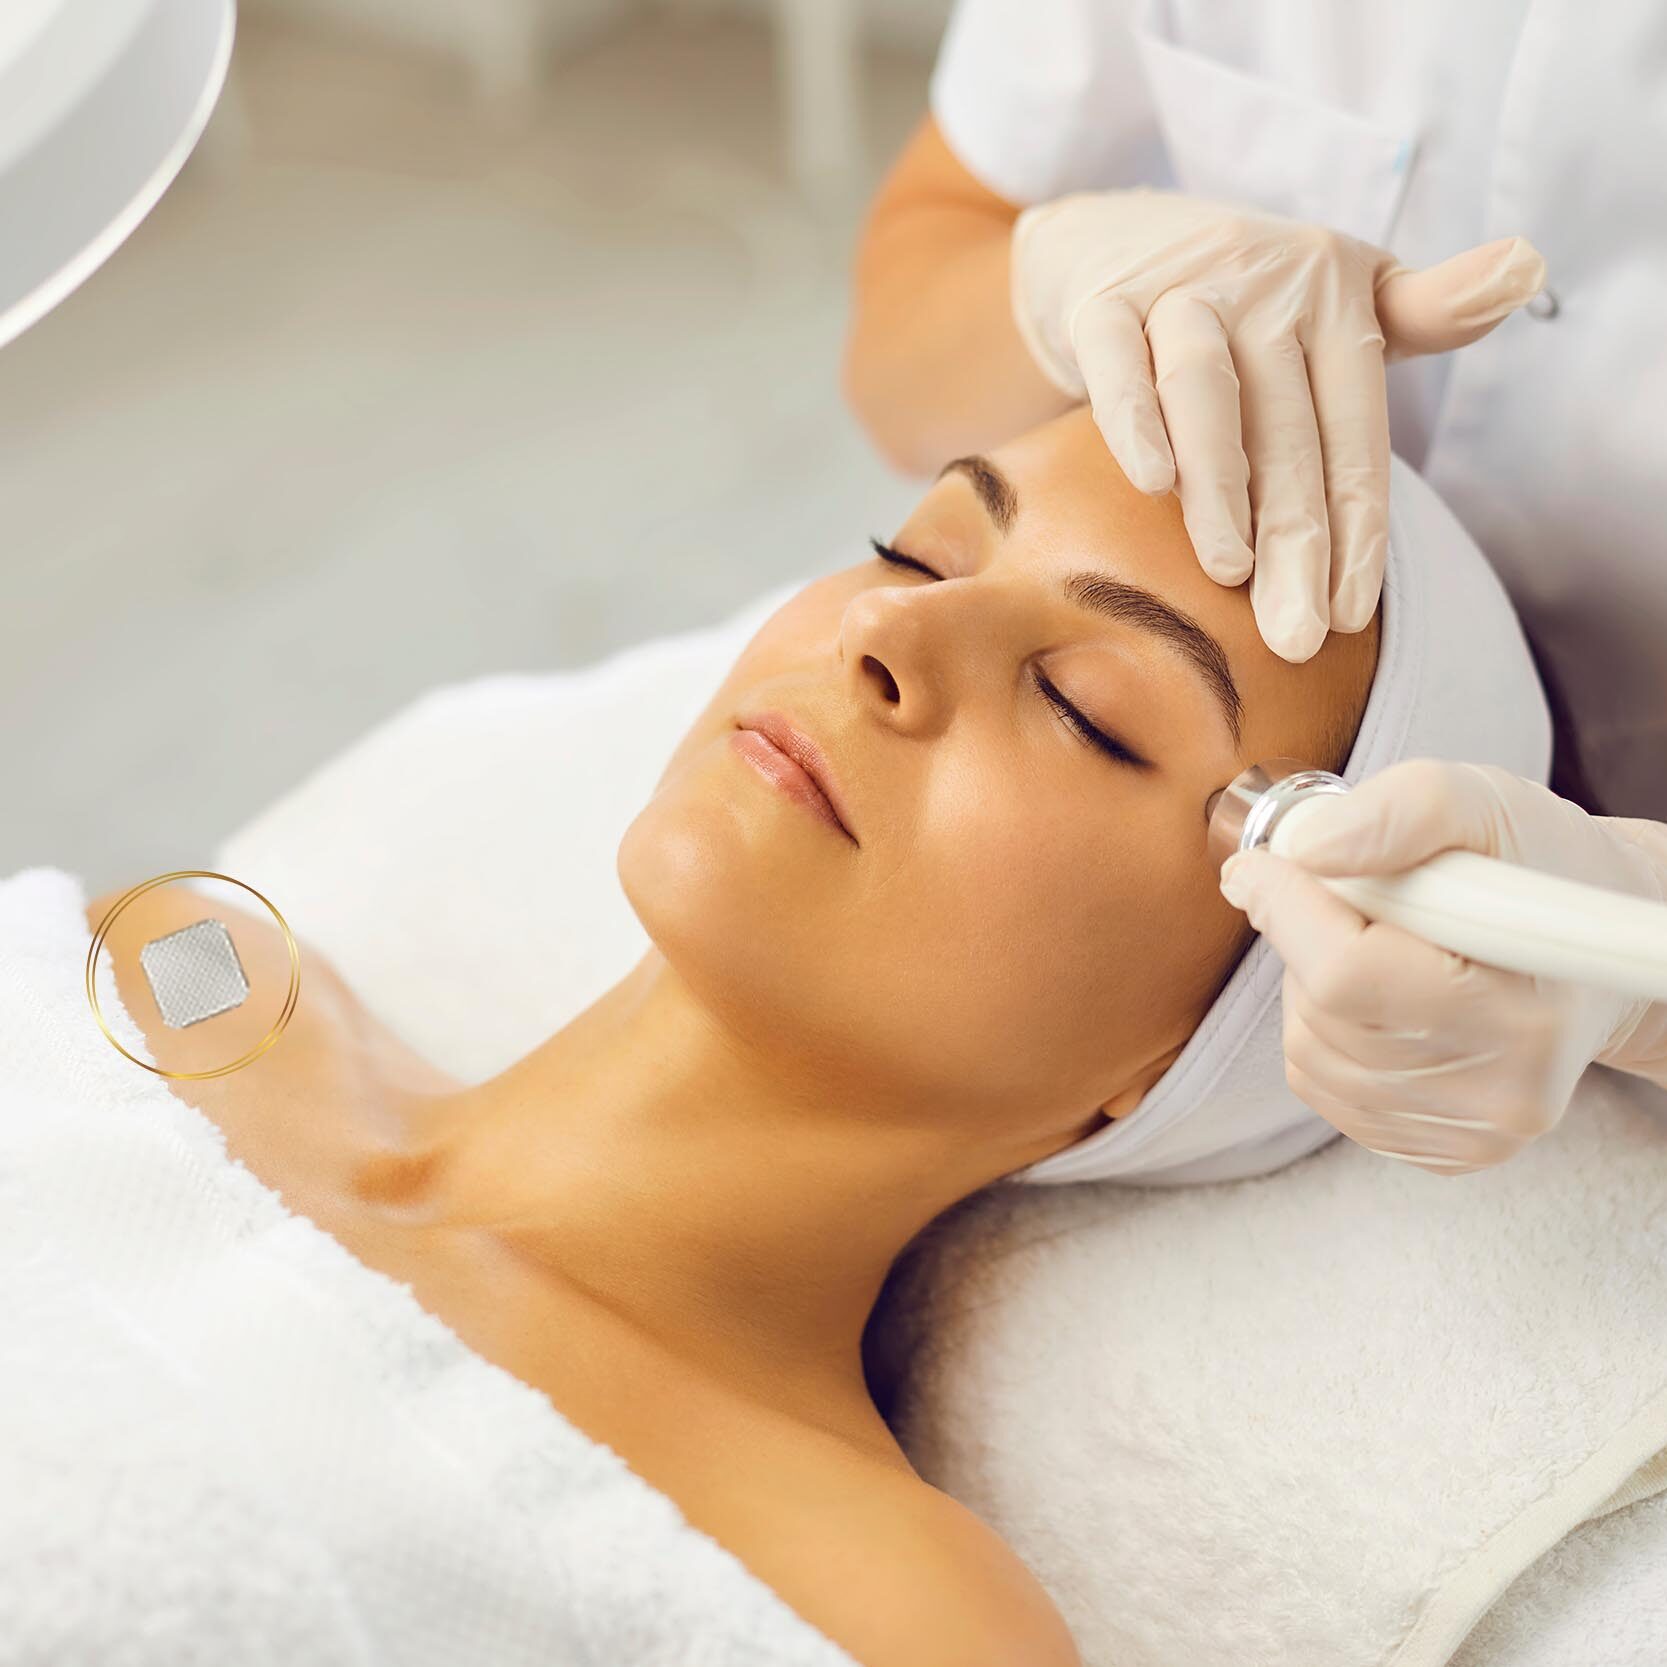 Relaxed young woman with eyes closed getting procedure of vacuum facial cleaning from cosmetologist in gloves in beauty spa salon. Facial treatment, skincare, cosmetology concept